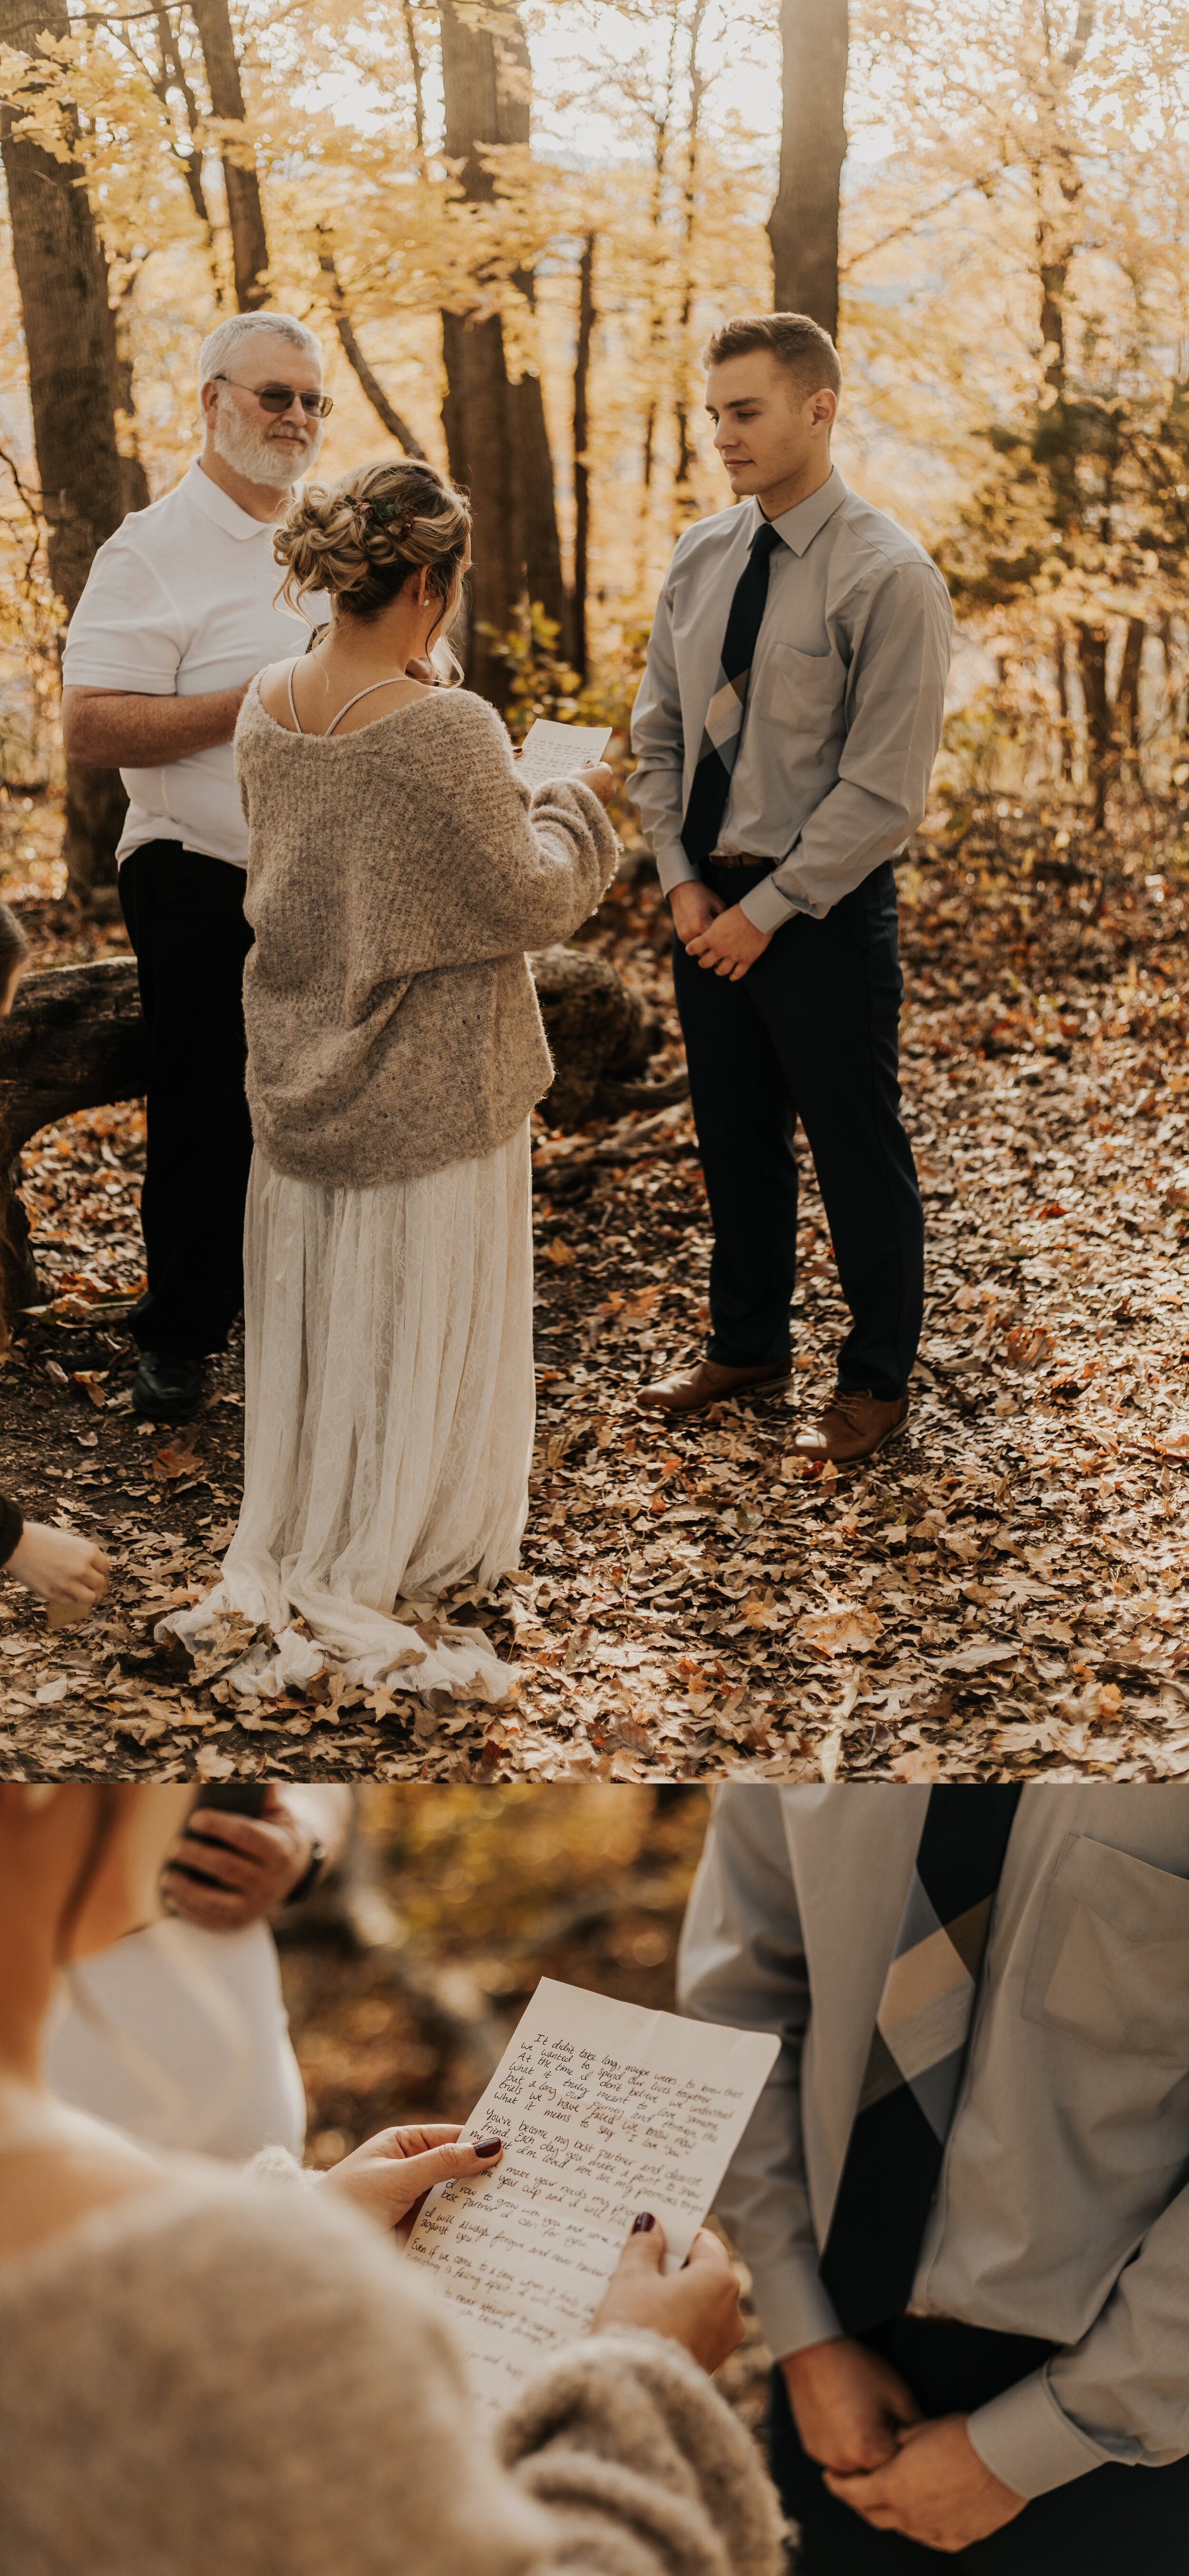 jessika-christine-photography-elopement-couples-outdoor-adventurous-session (7).jpg